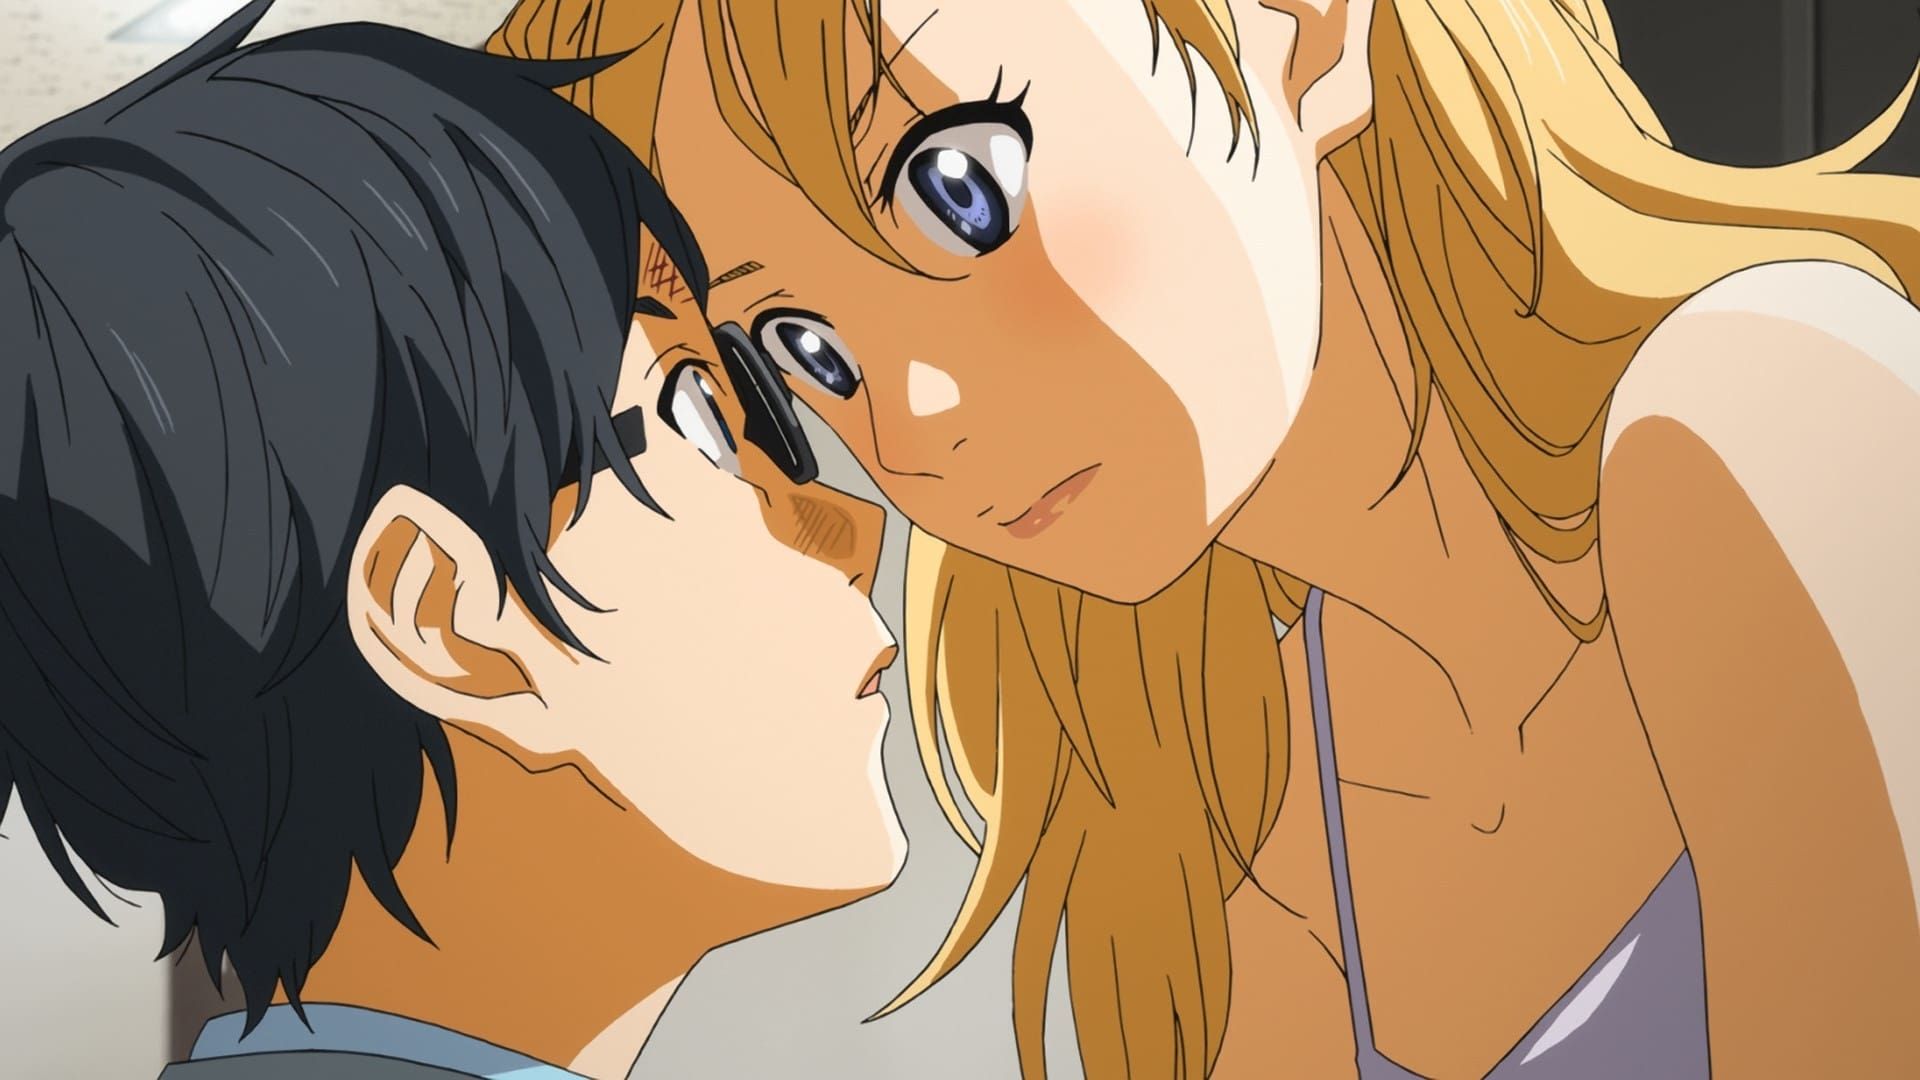 Your Lie in April background